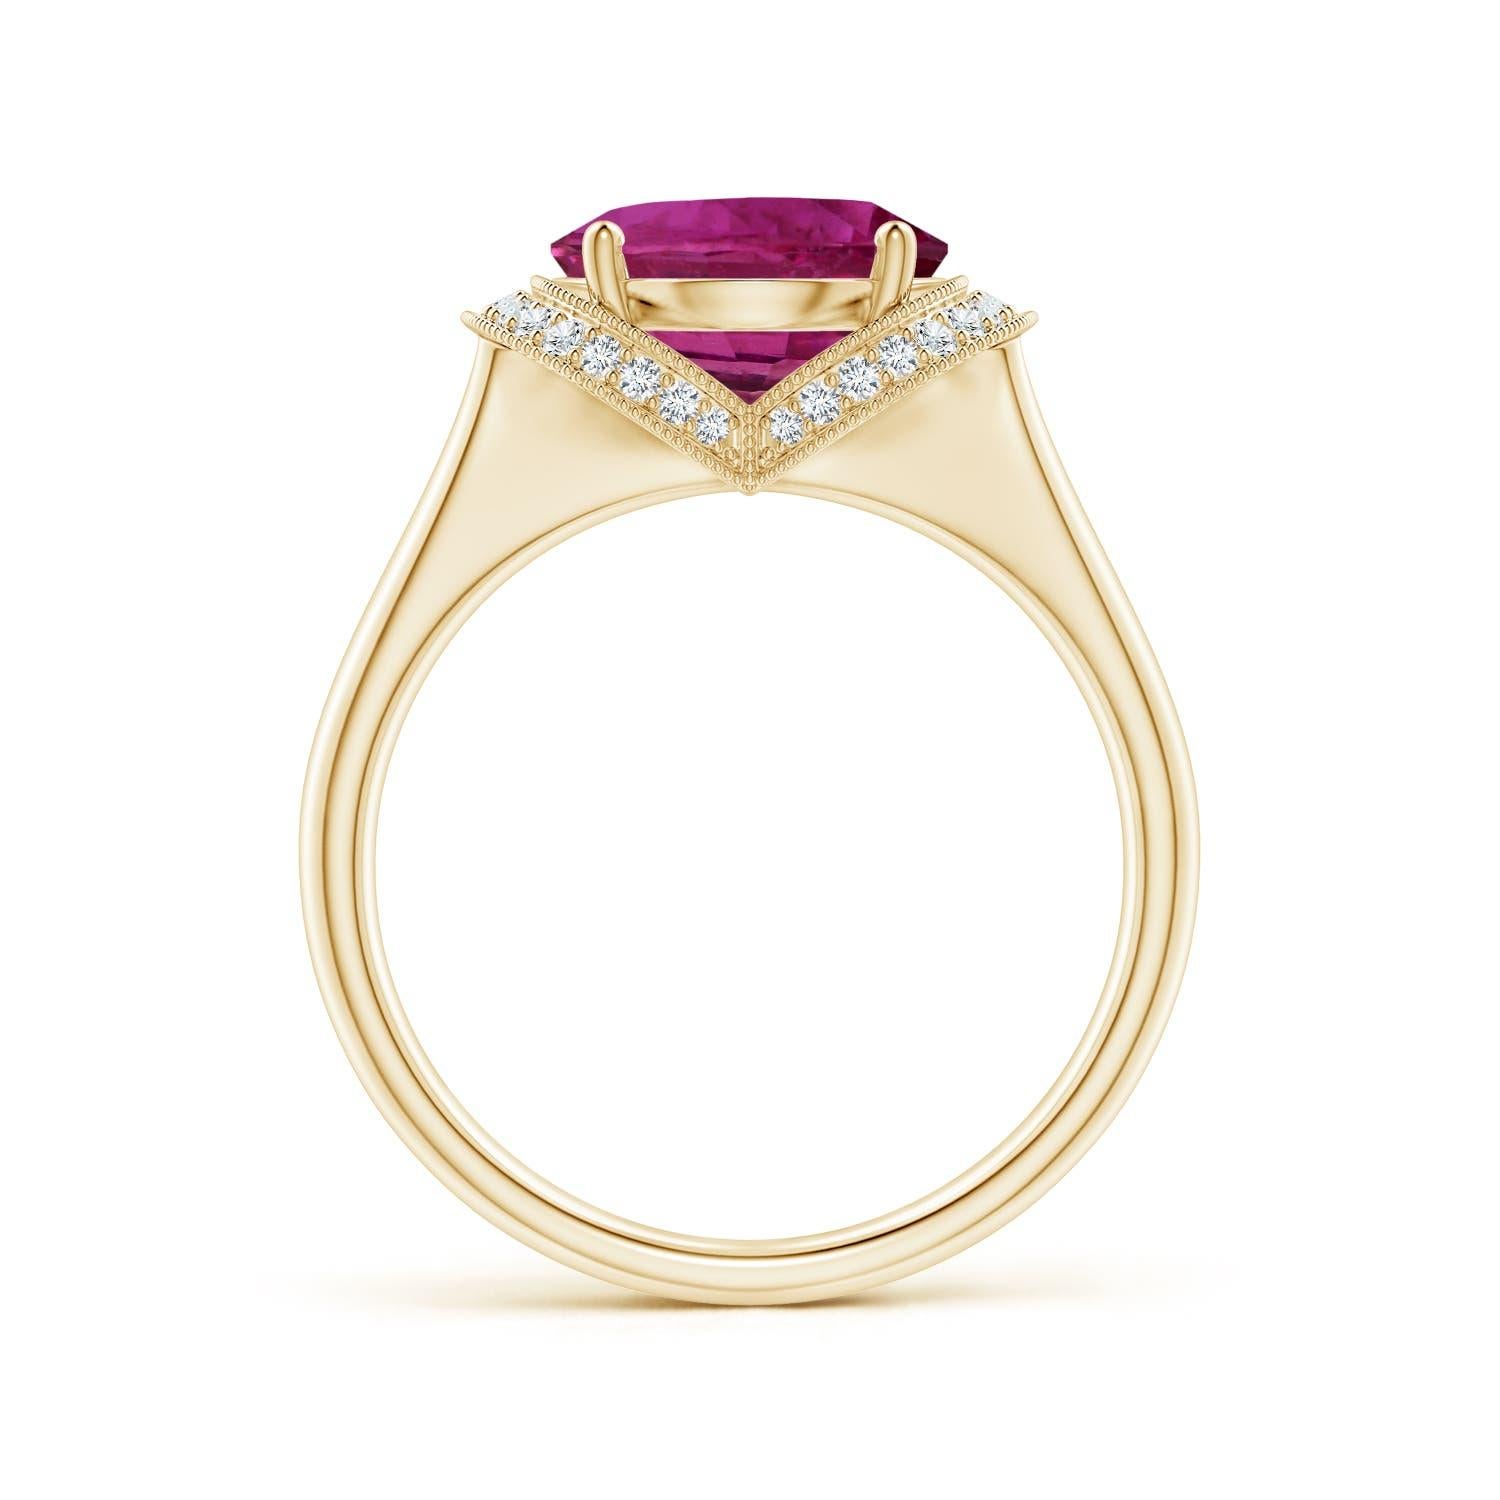 For Sale:  Angara Gia Certified Pink Sapphire Ring in Yellow Gold with Diamond Half Halo 2